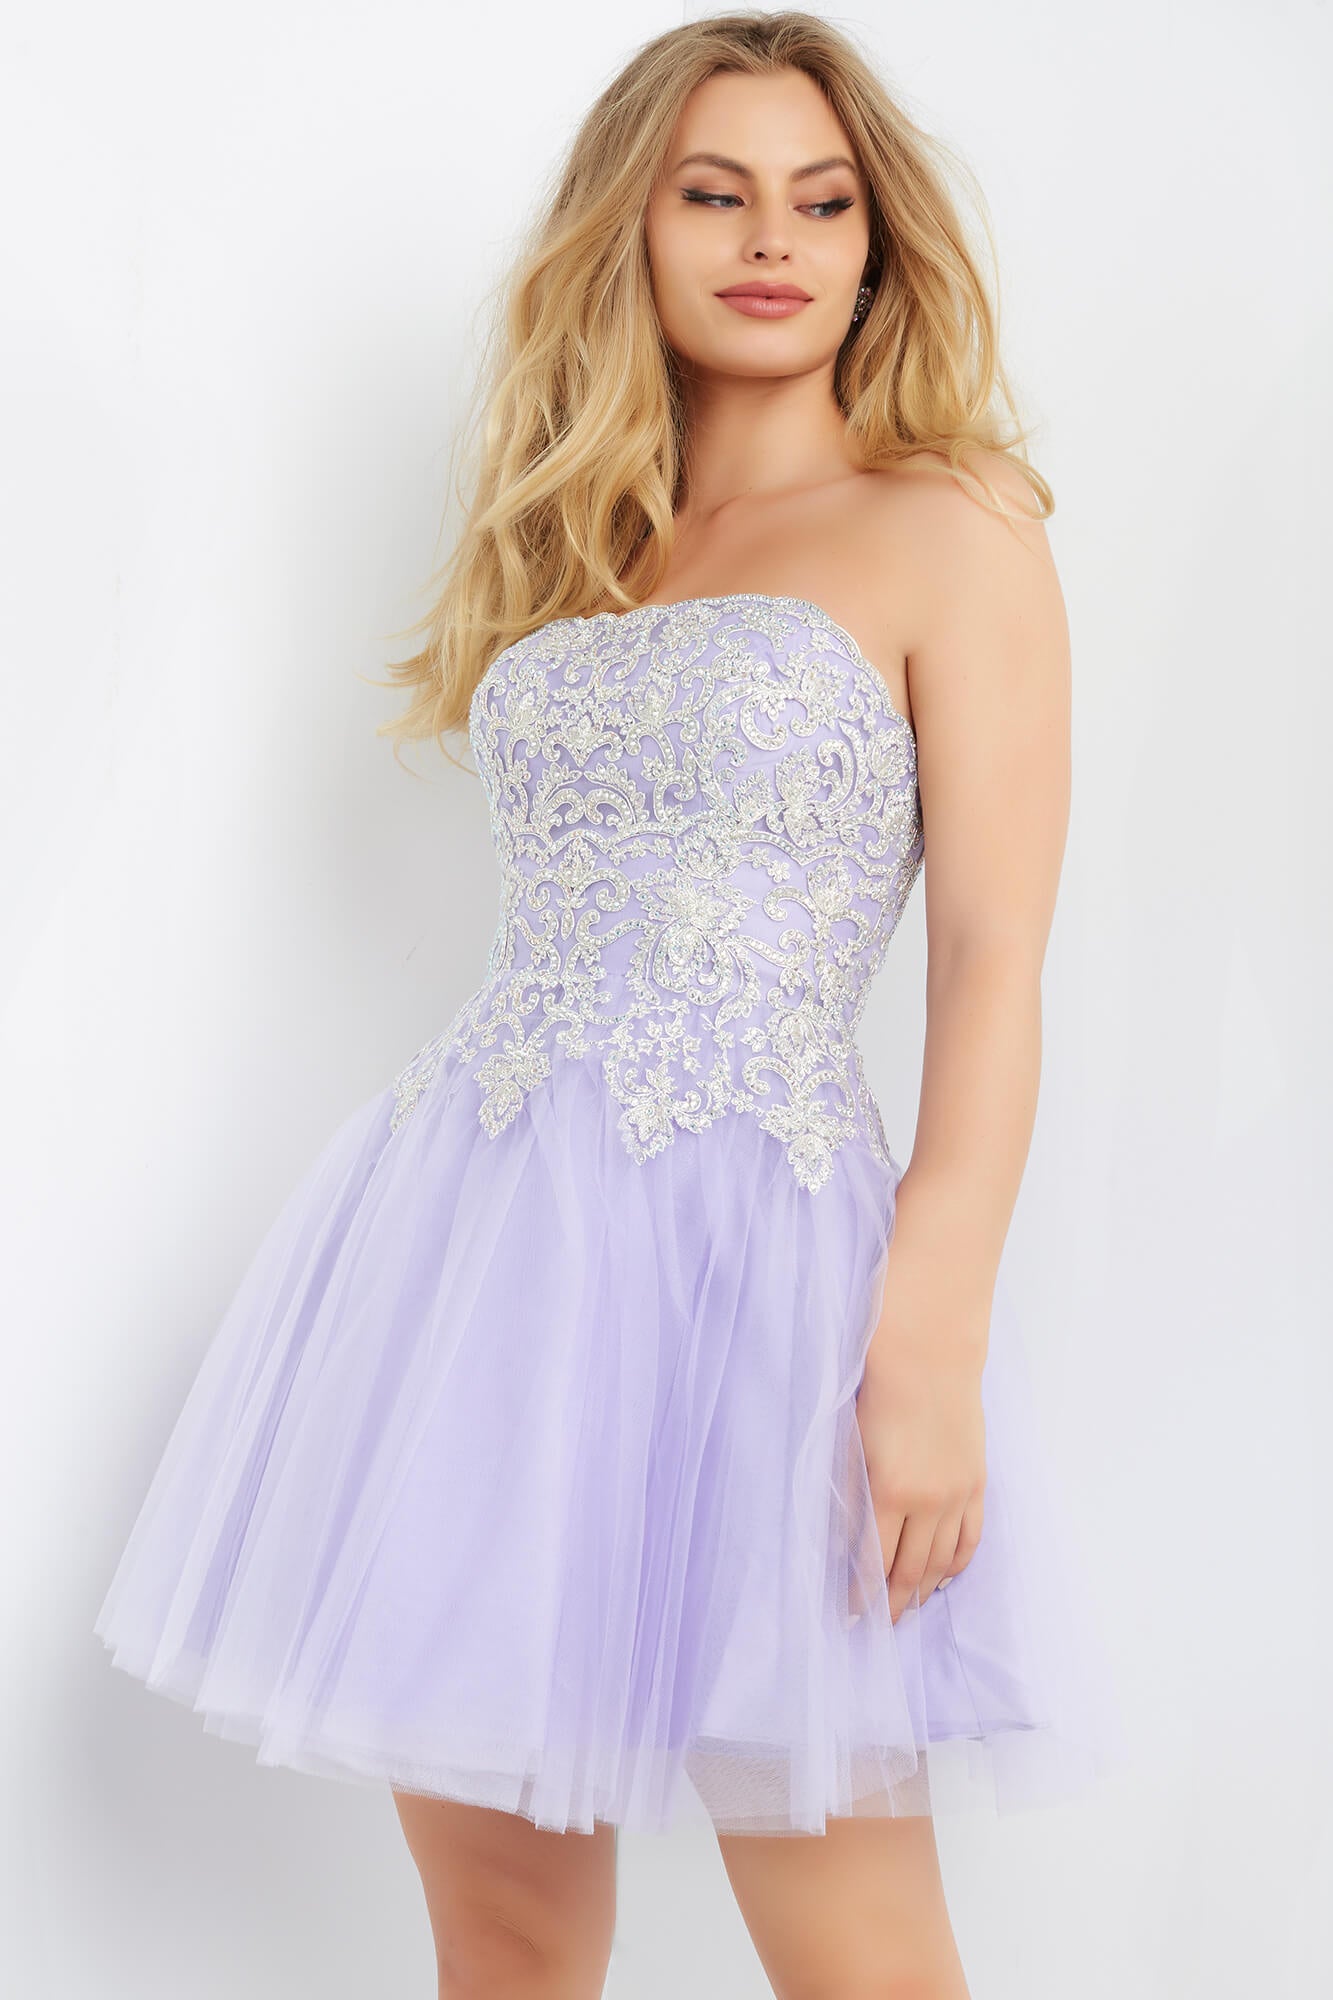 Strapless Fit And Flare Homecoming Dress By Jovani -JVN63635